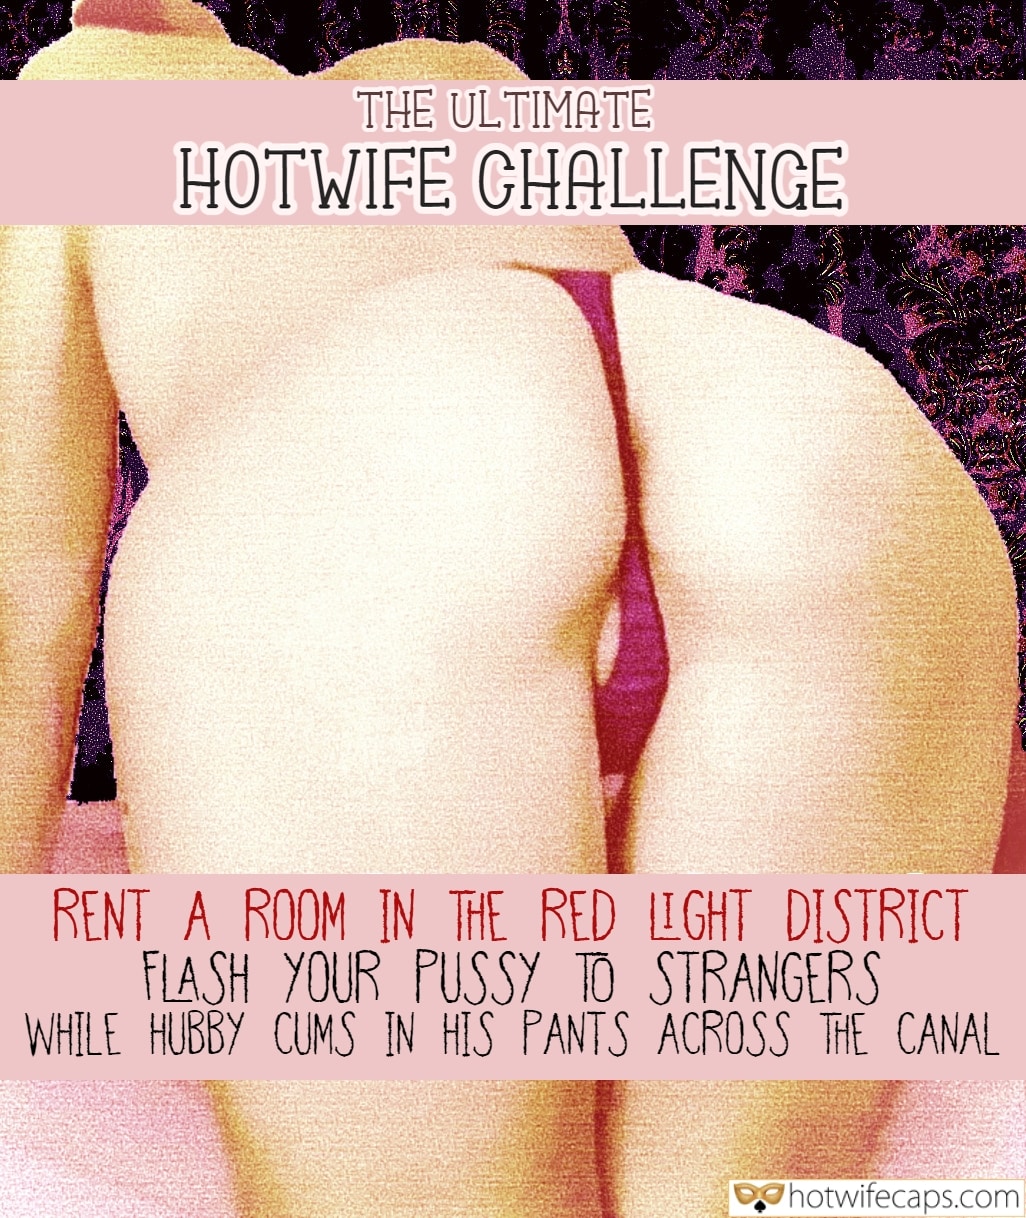 Wife Sharing Vacation Public Flashing Cuckold Stories Challenges and Rules hotwife caption: THE ULTIMATE HOTWIFE CHALLENGE RENT A ROOM IN THE RED LIGHT DISTRICT FLASH YOUR PUSSY TO STRANGERS WHILE HUBBY CUMS IN HIS PANTS ACROSS THE CANAL.. cuckold wife story hotwife captions vacation tumbex sex wife caption cuckold wife stories hotwife...